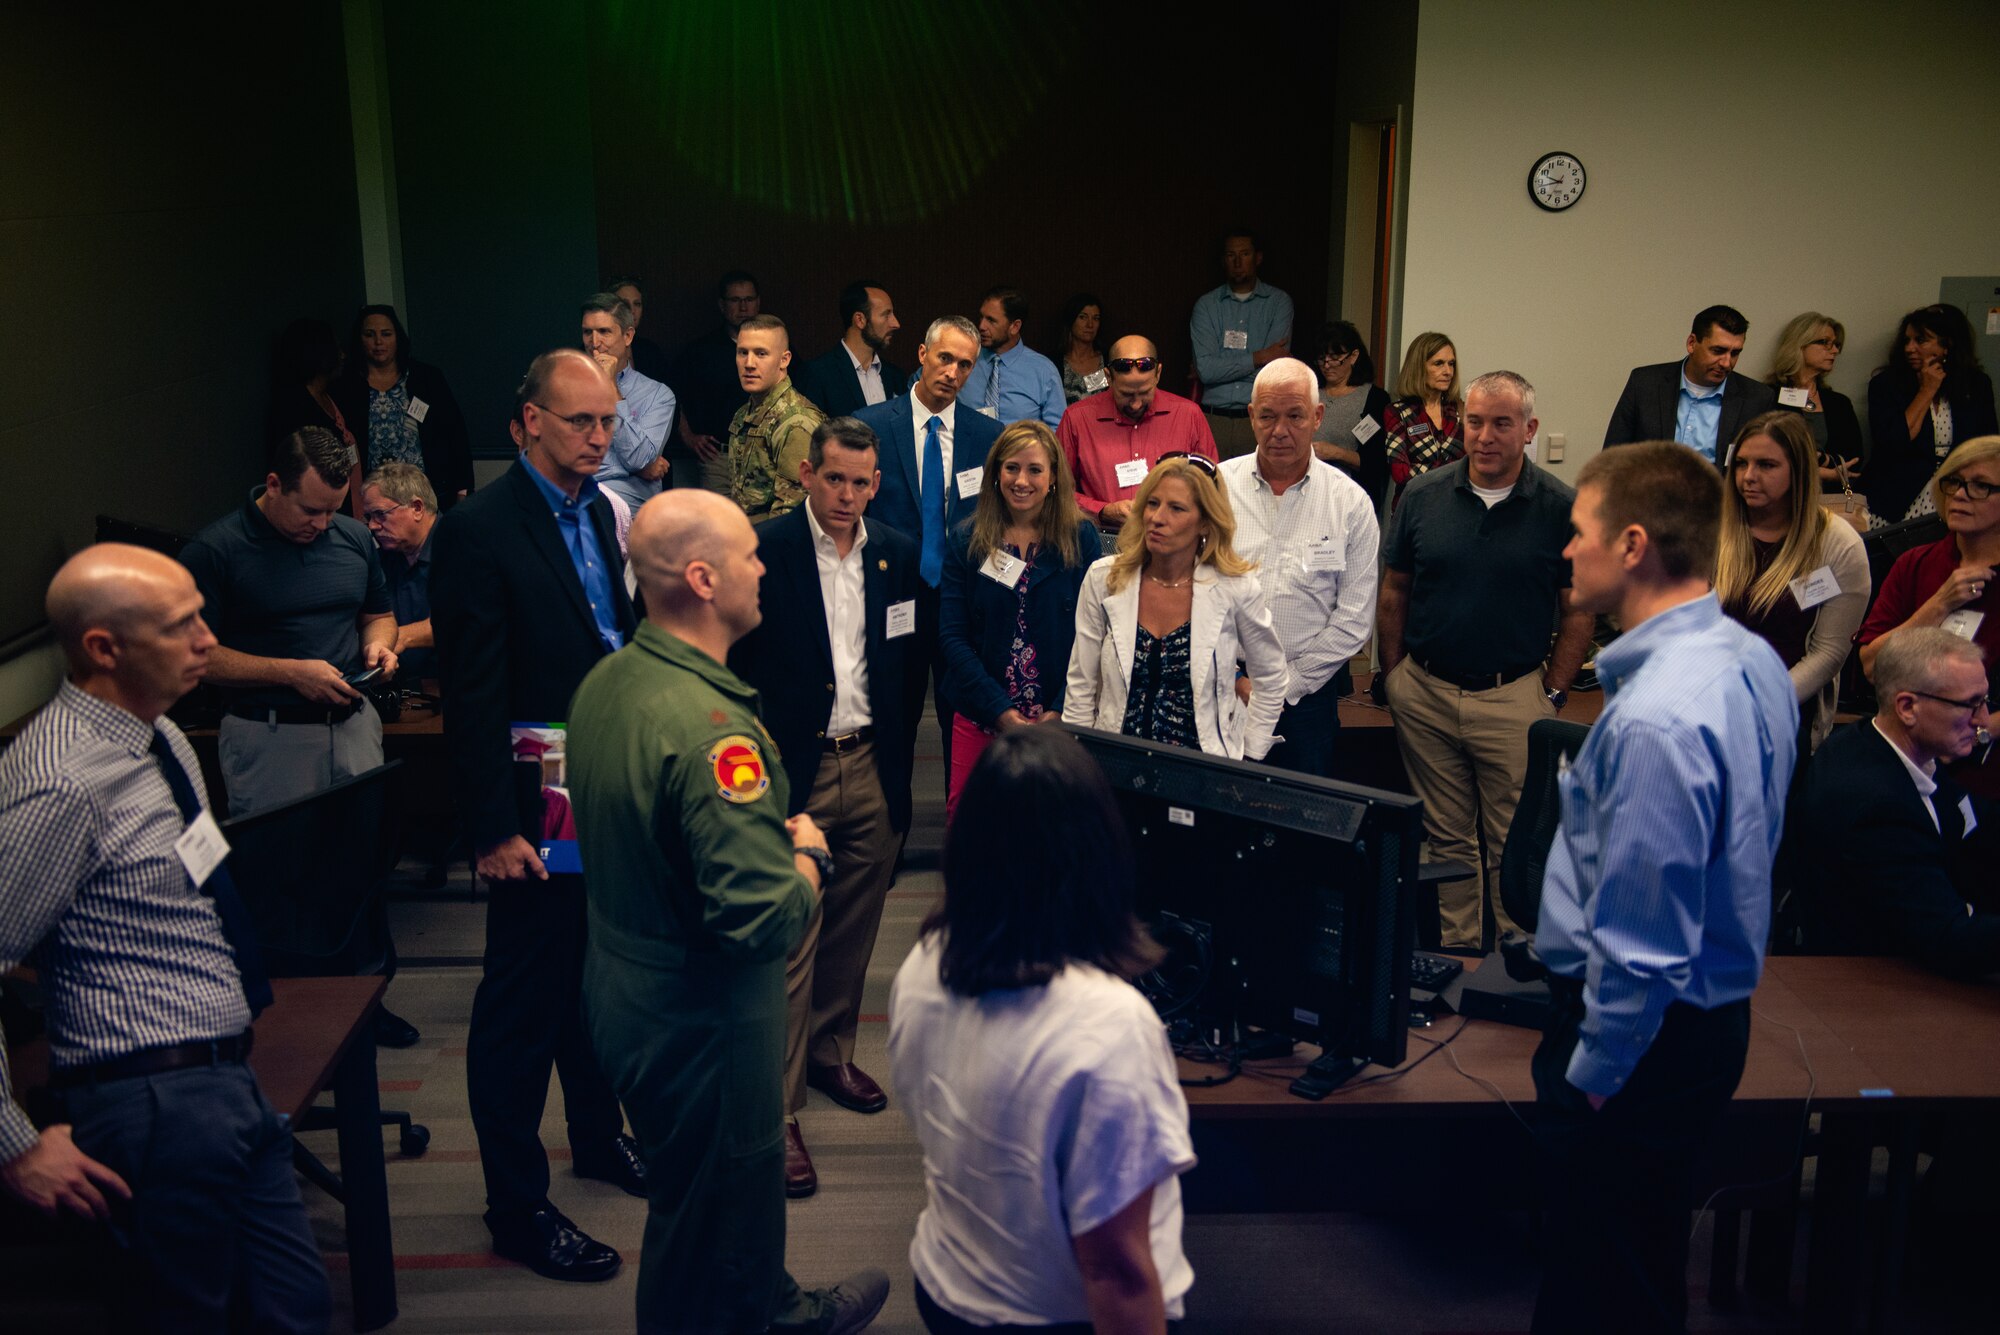 Maj. William Andreotta, 56th Training Squadron director of operations, speaks to Personalized Learning Cohort members during their tour at Luke Air Force Base, Ariz., Nov. 2, 2018. The Personalized Learning Cohort consists of educational leaders from around the United States who work to overcome organizational barriers and create a sustainable network supporting ownership of learning. (U.S. Air Force photo by Senior Airman Alexander Cook)